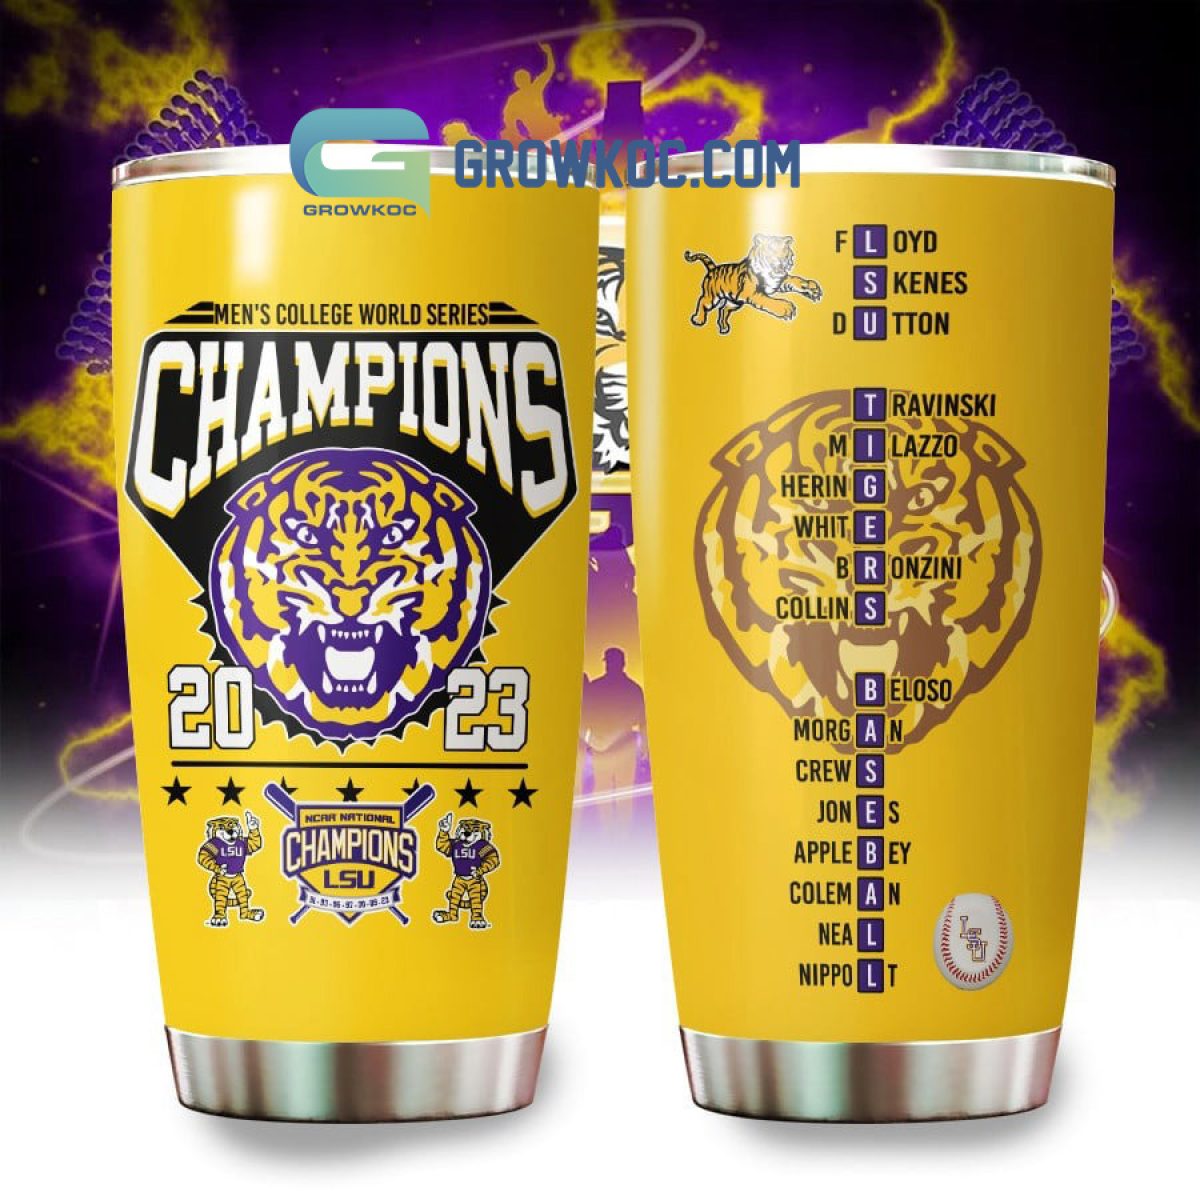 Tervis LSU Tigers Campus 30oz. Stainless Steel Tumbler